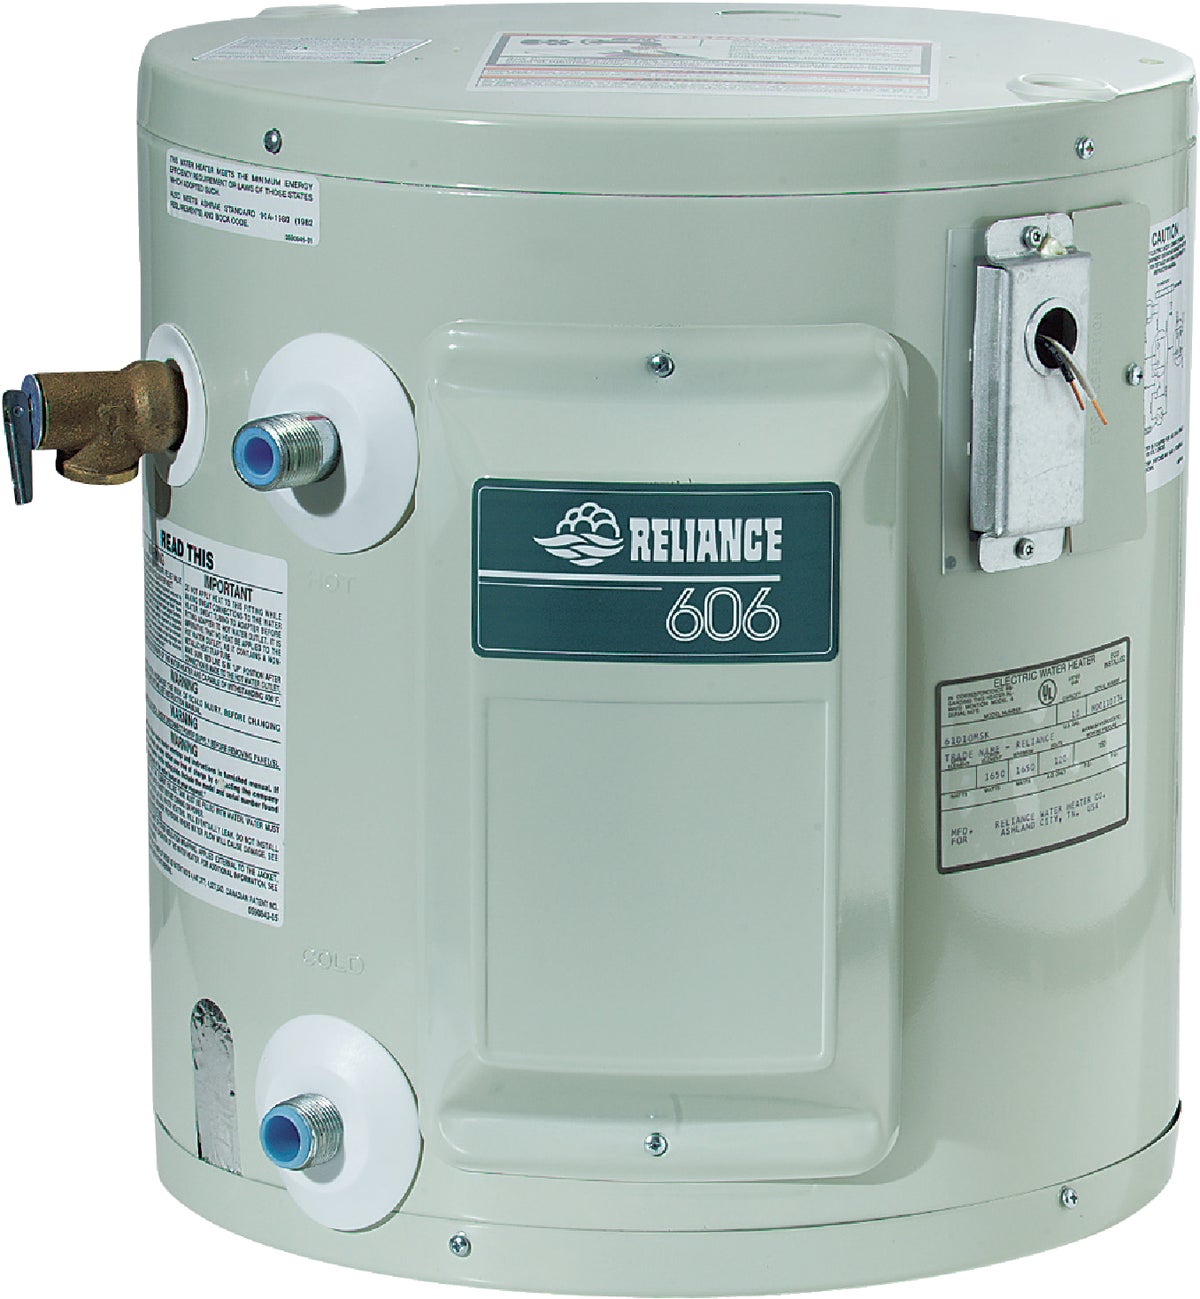 buy-reliance-6yr-compact-electric-water-heater-6-gal